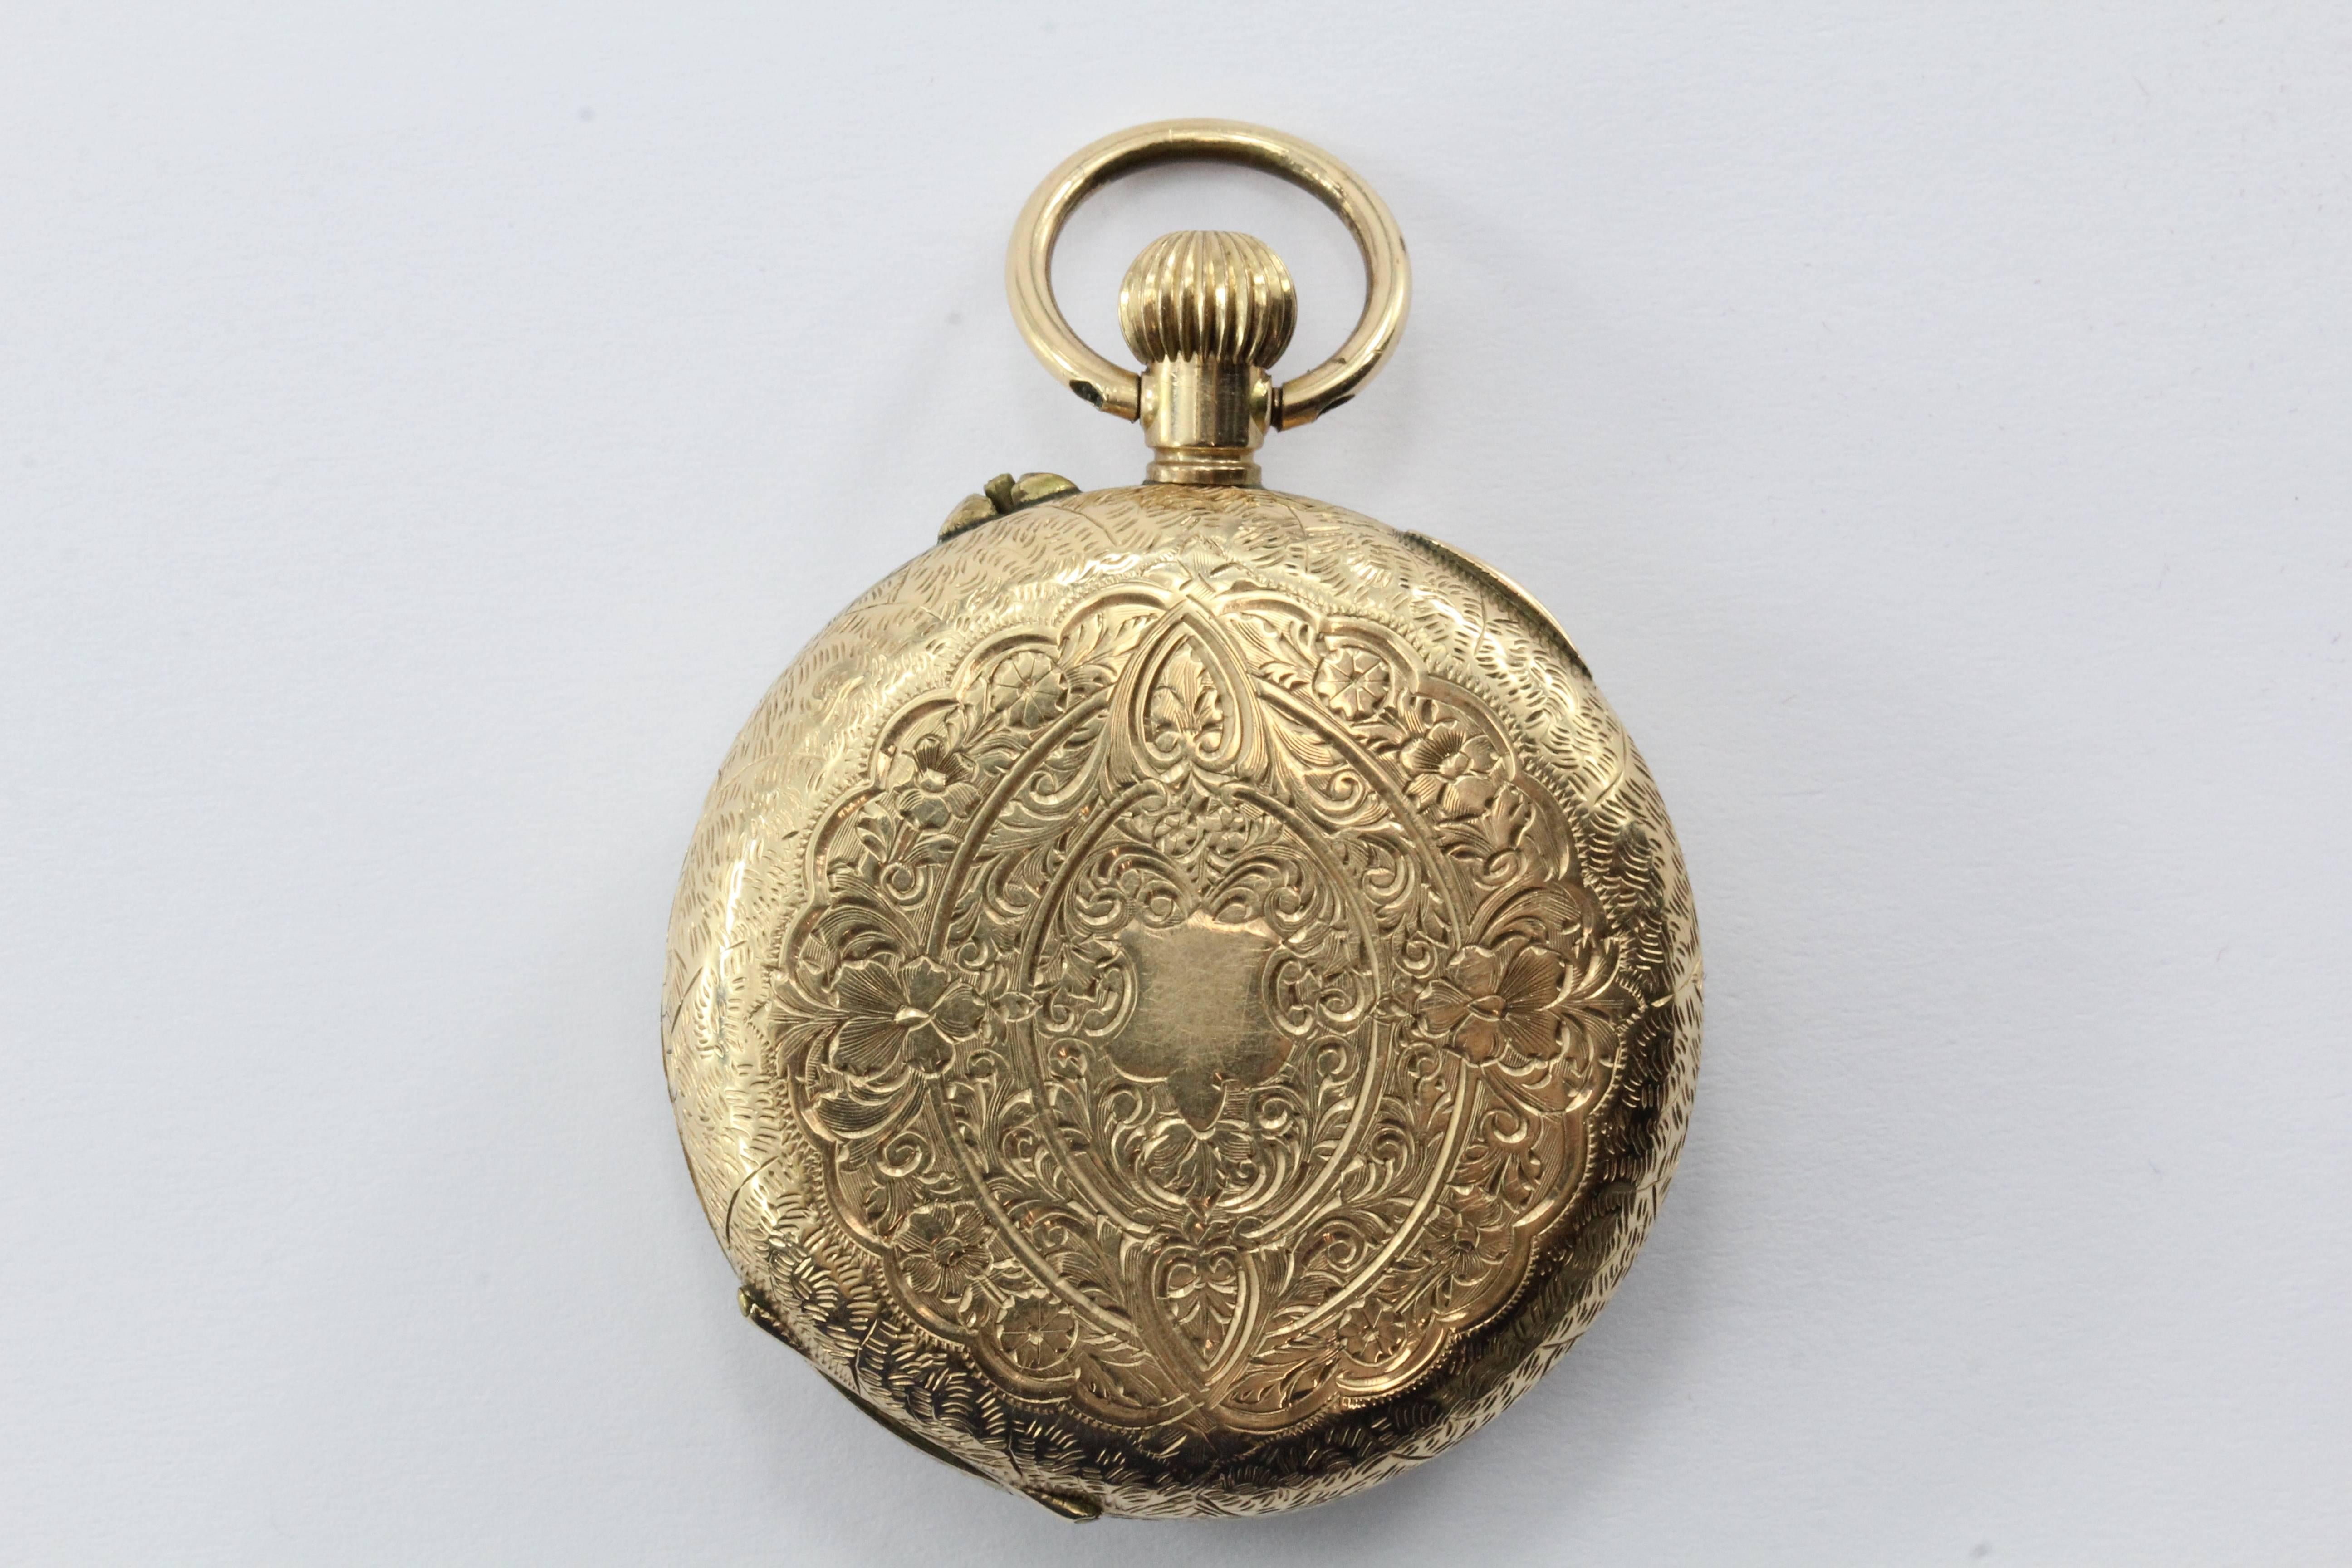 Antique 14K Gold Swiss Gold Enamel Pocket Watch. The watch is in great antique estate condition. The watch is running but requires a slight shake to get running so it should be serviced. The enamel dial is in excellent condition with no cracks or